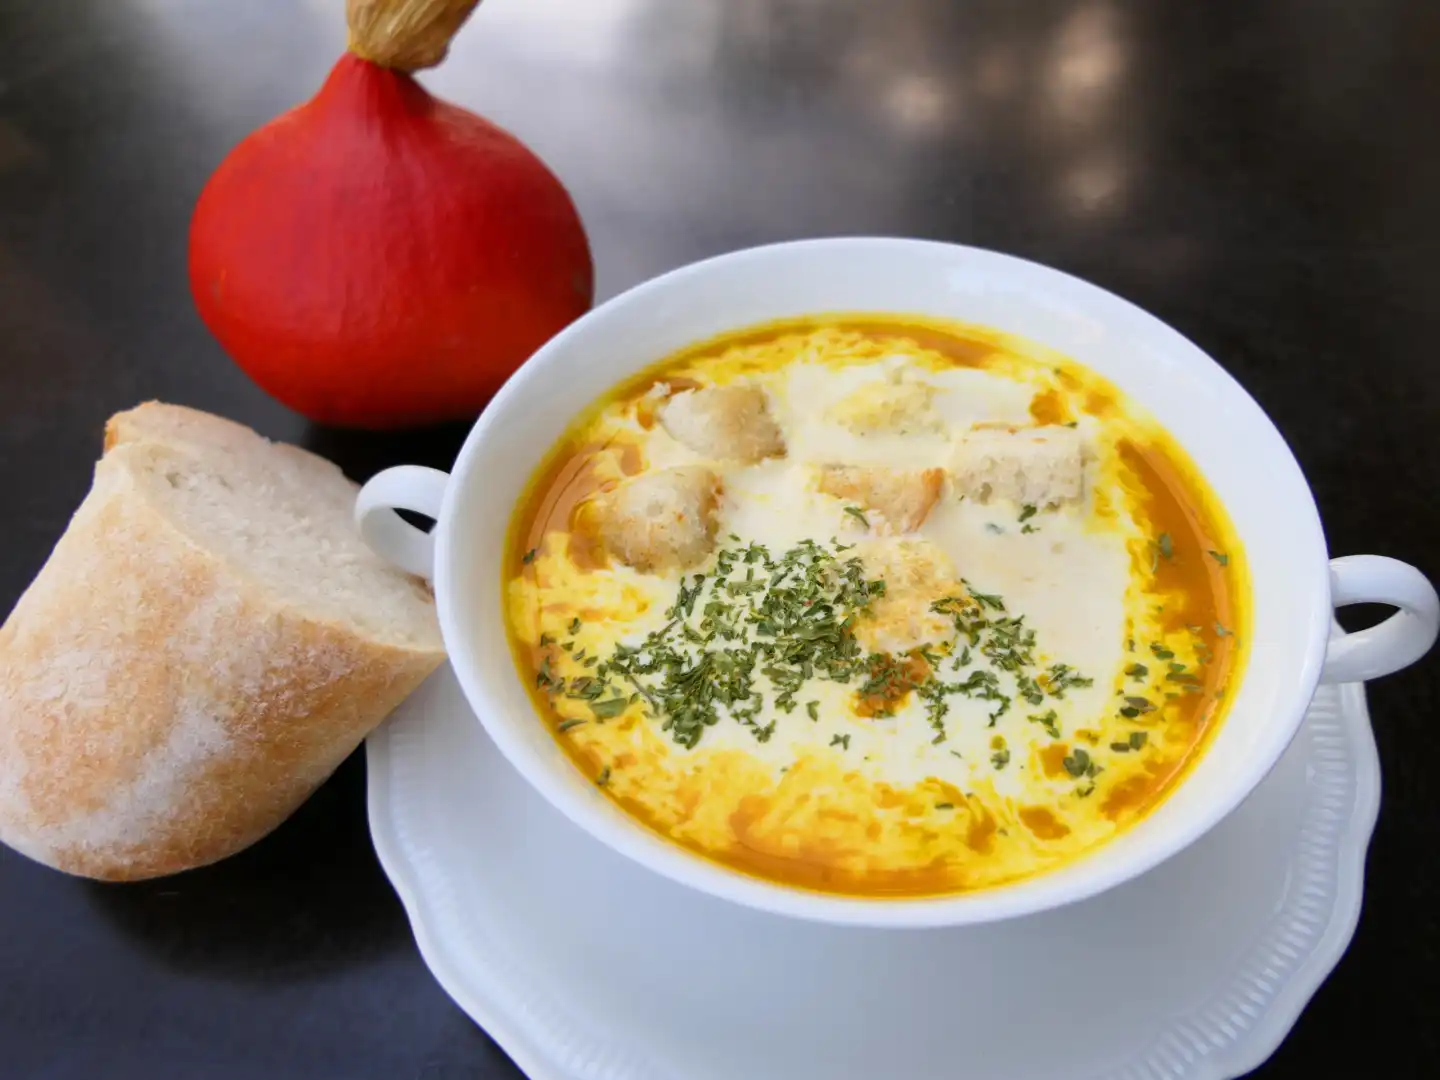 Cream of pumpkin soup from Hokkaido pumpkins, refined with cream and croutons, freshly prepared